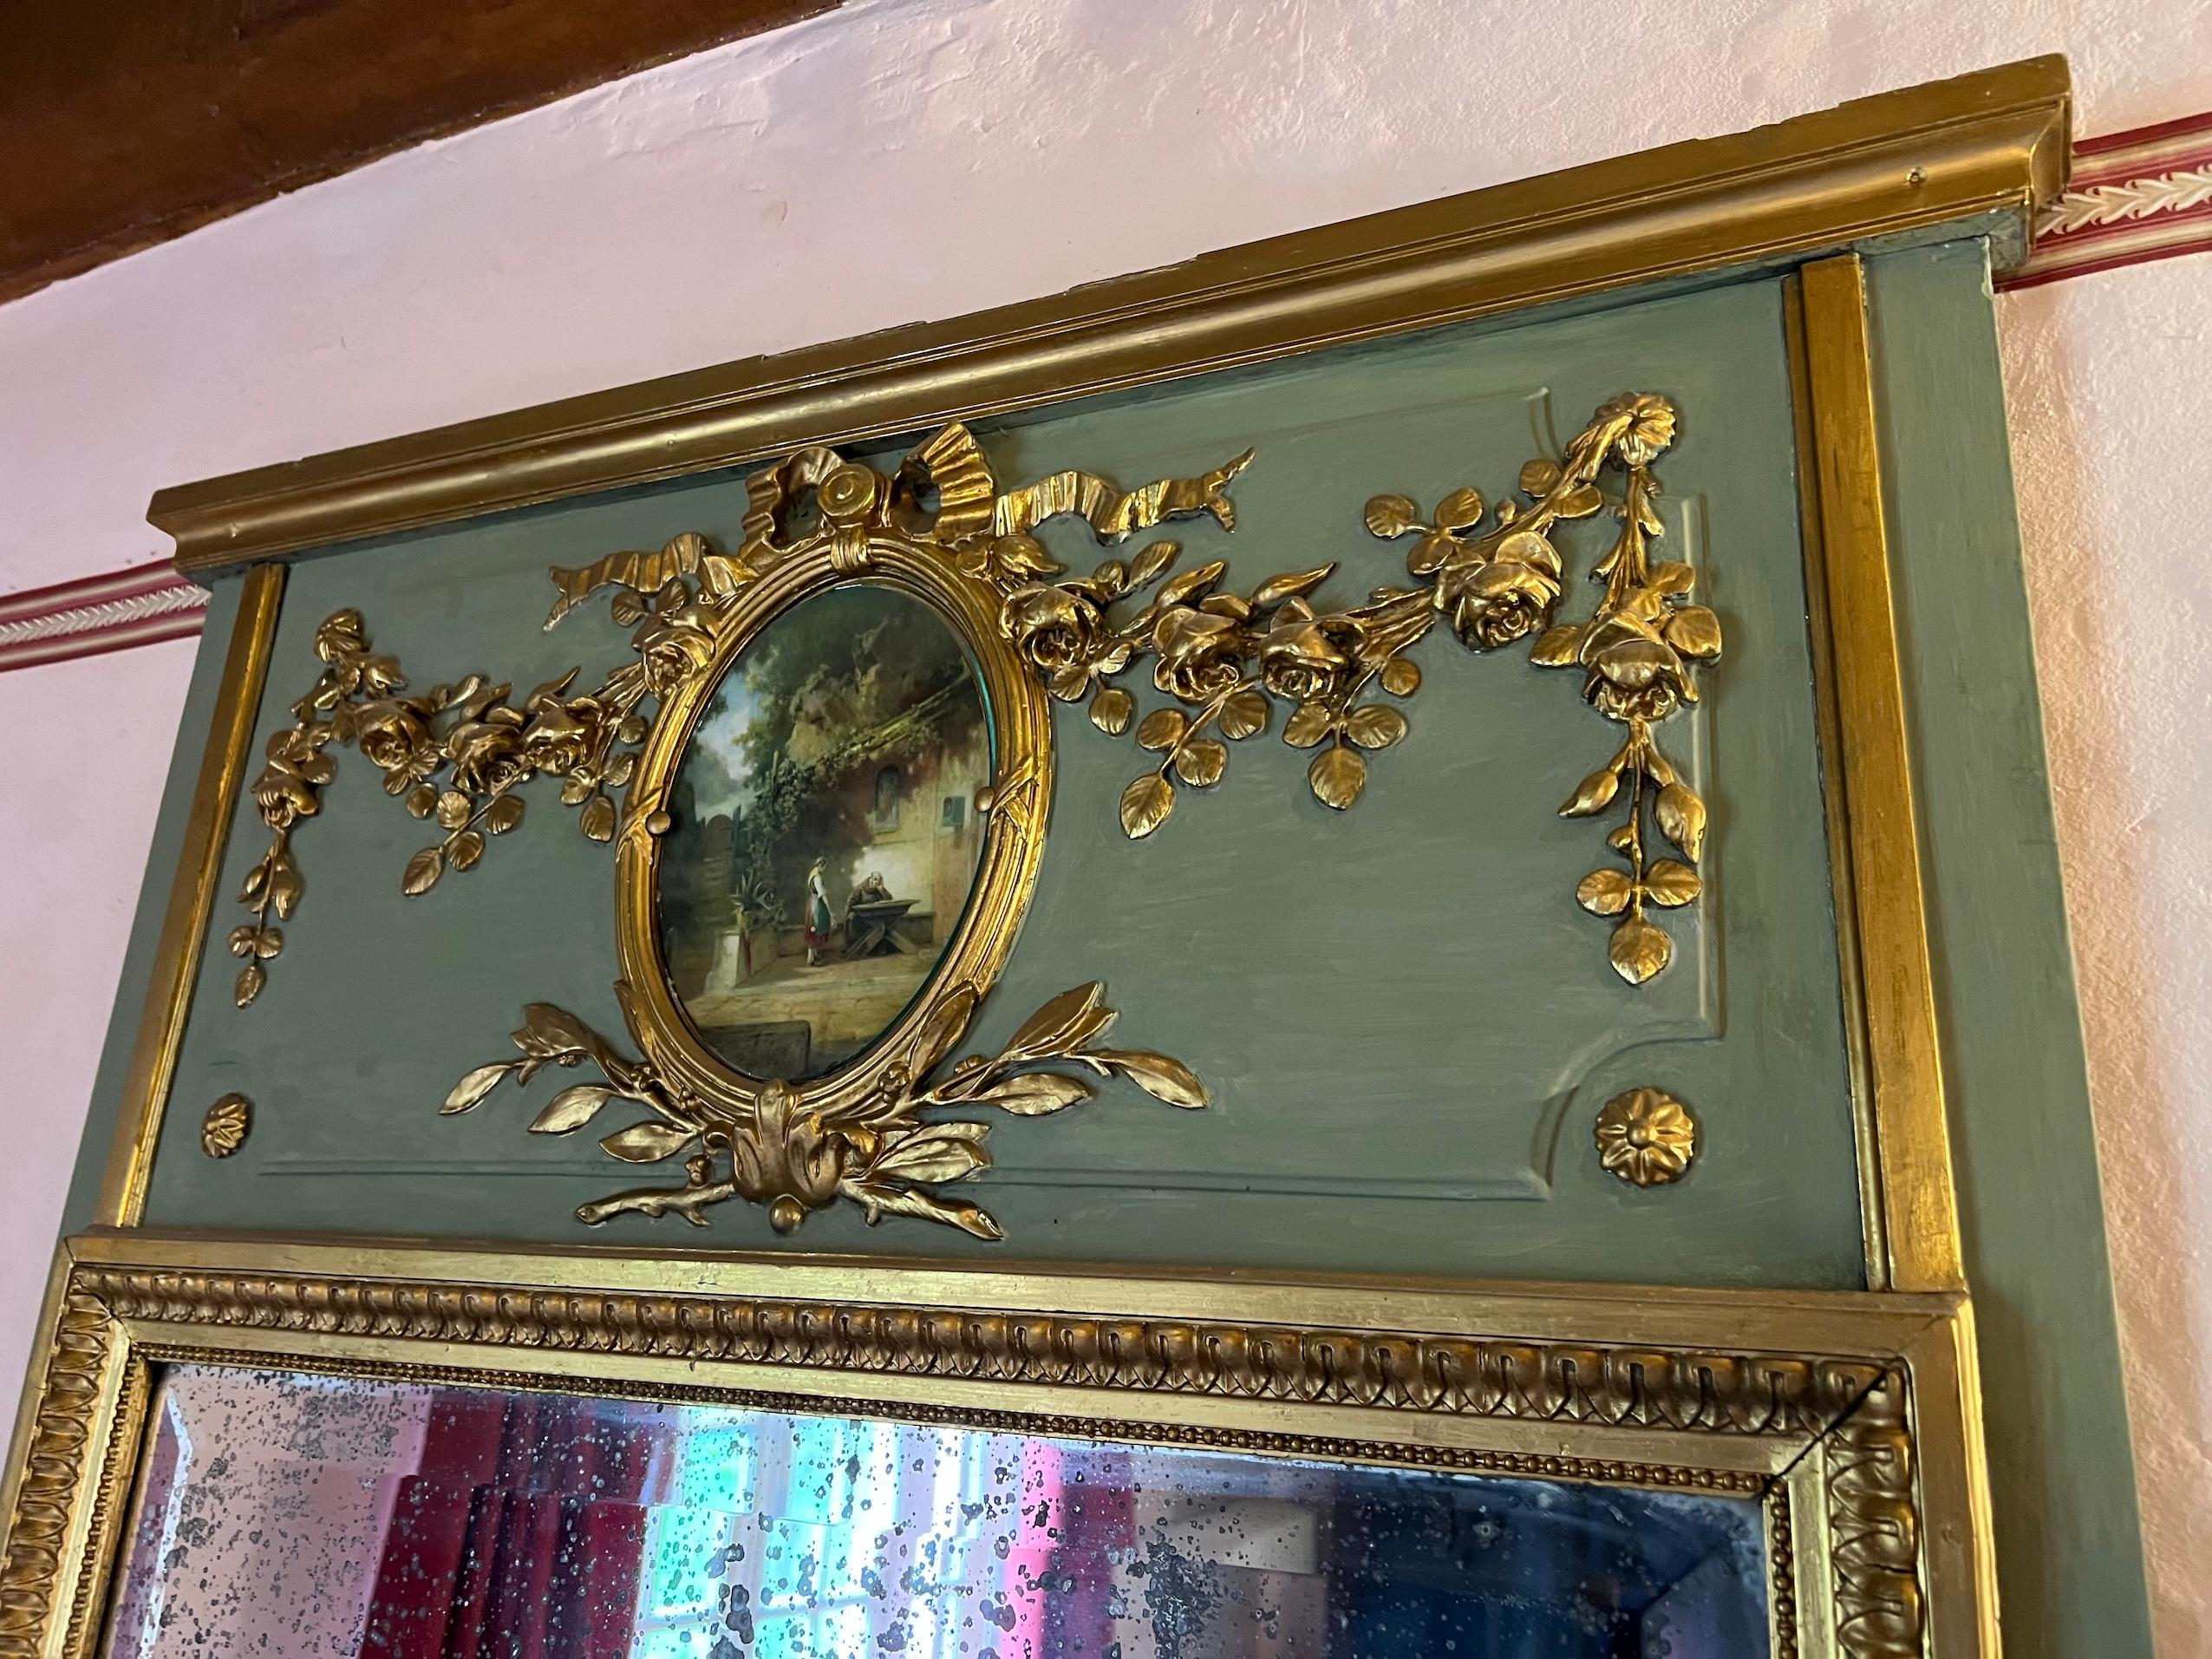 French 19th Century Louis XVI Style Trumeau Mirror
Louis XVI-style trumeau mirror. The painting depicts a countryside scene, enclosed within a medallion crowned by a stucco bow at the top. Adorning the sides are delicate garlands of roses. The